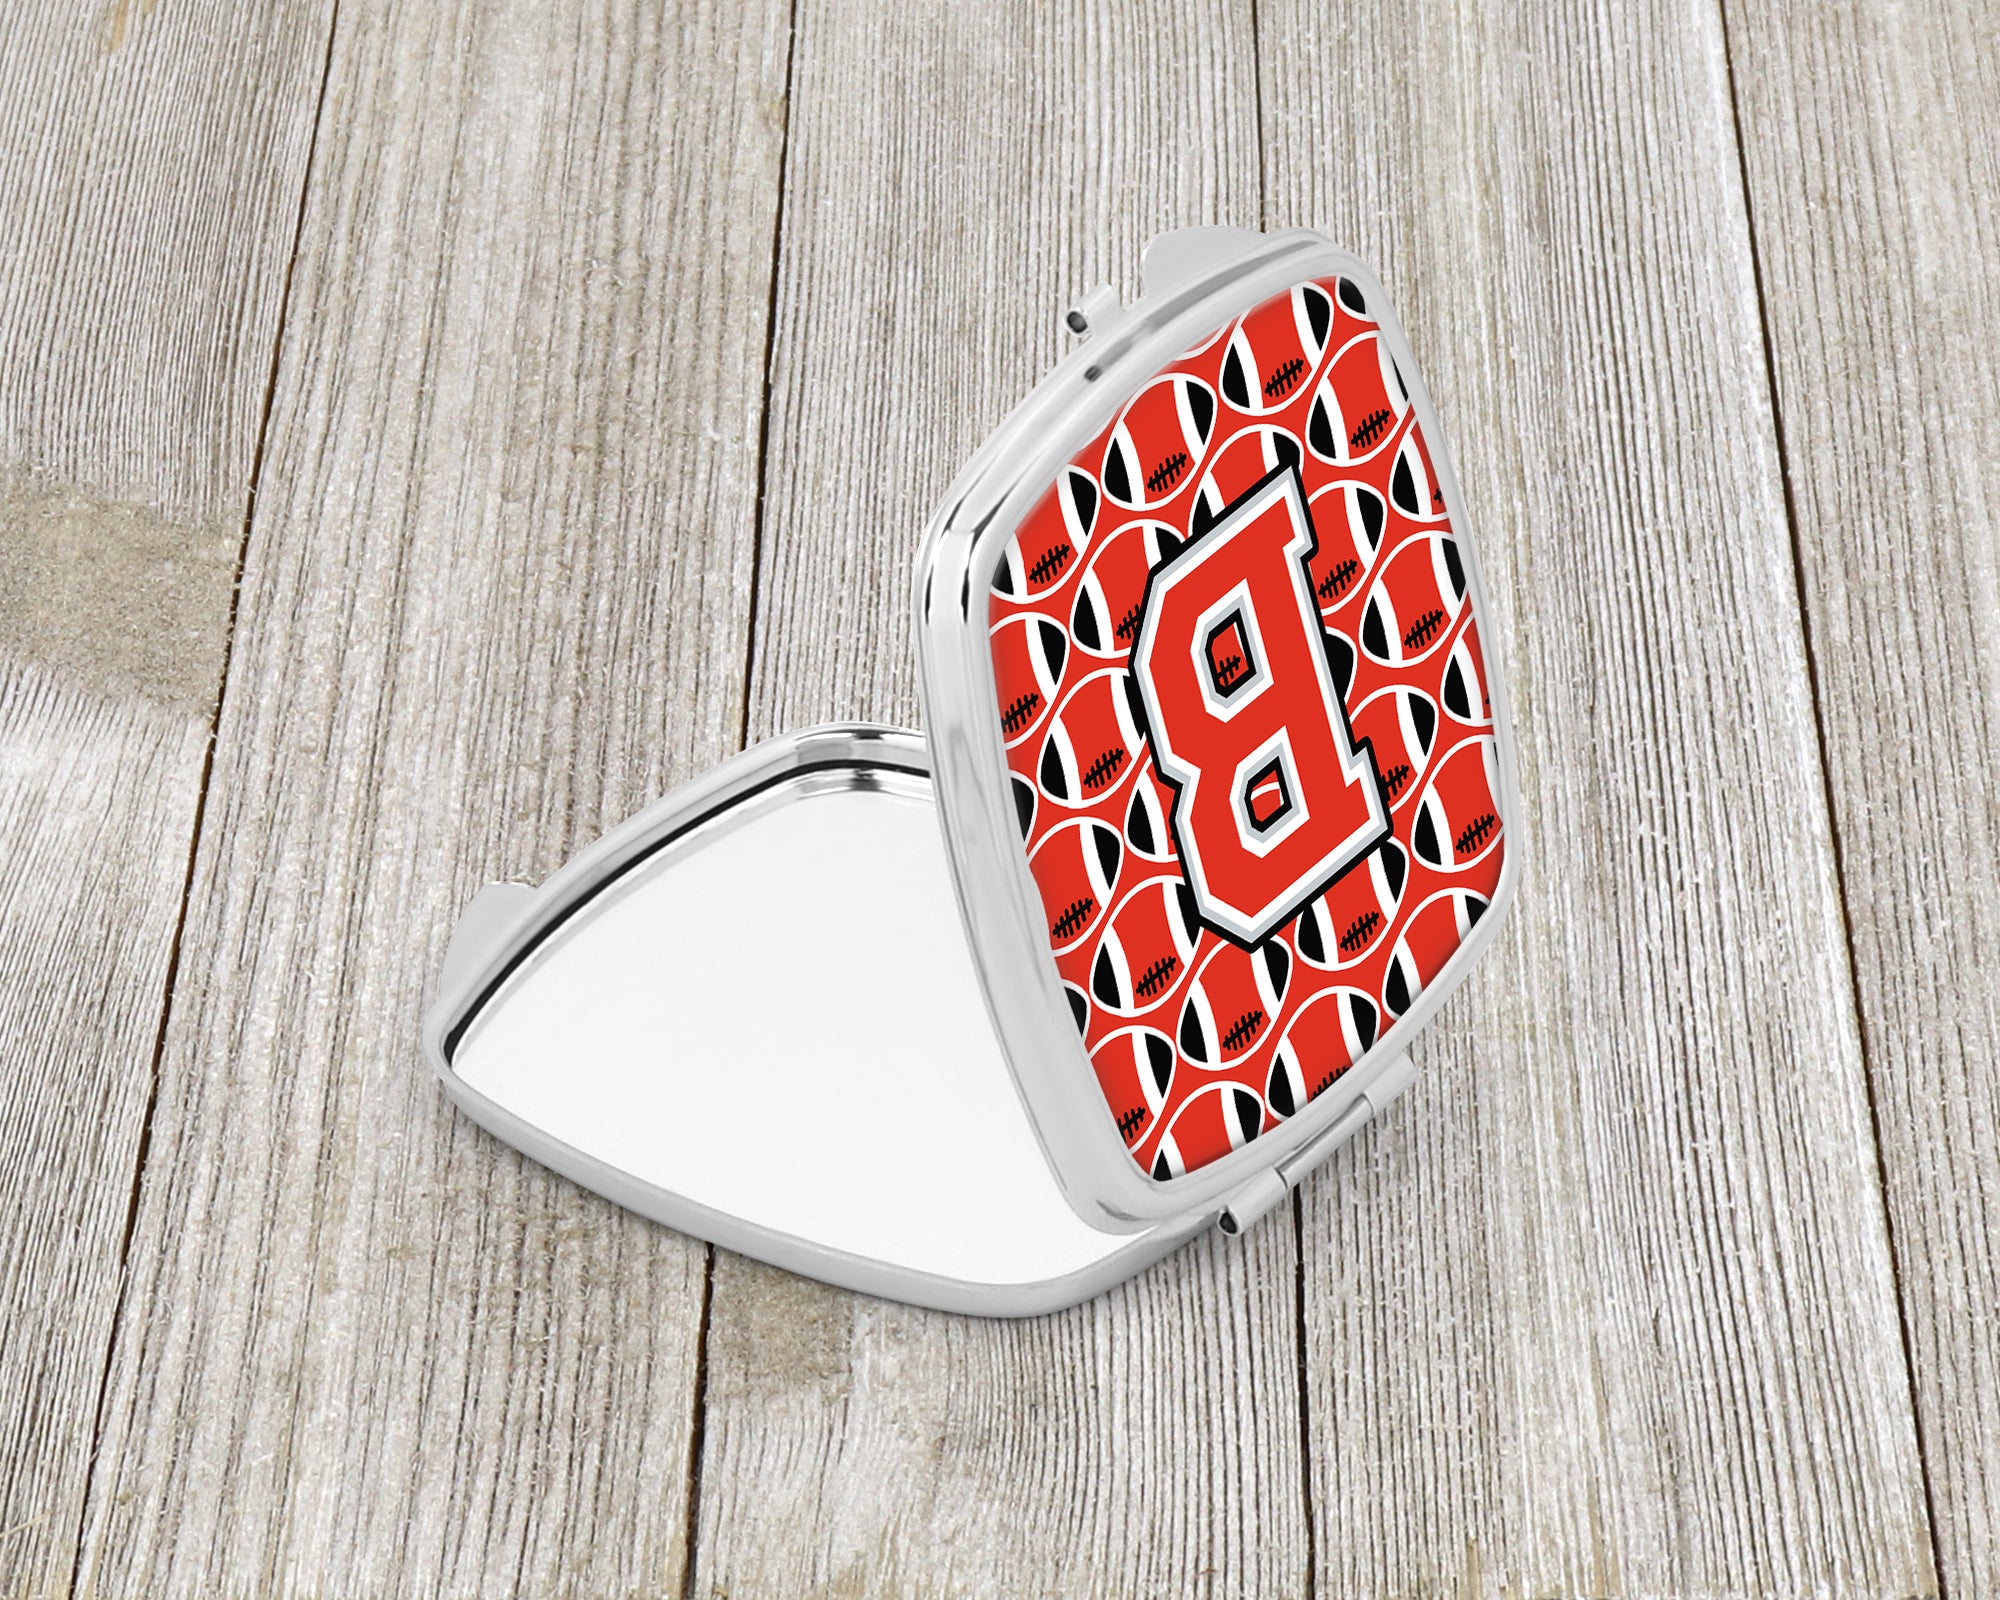 Letter B Football Scarlet and Grey Compact Mirror CJ1067-BSCM